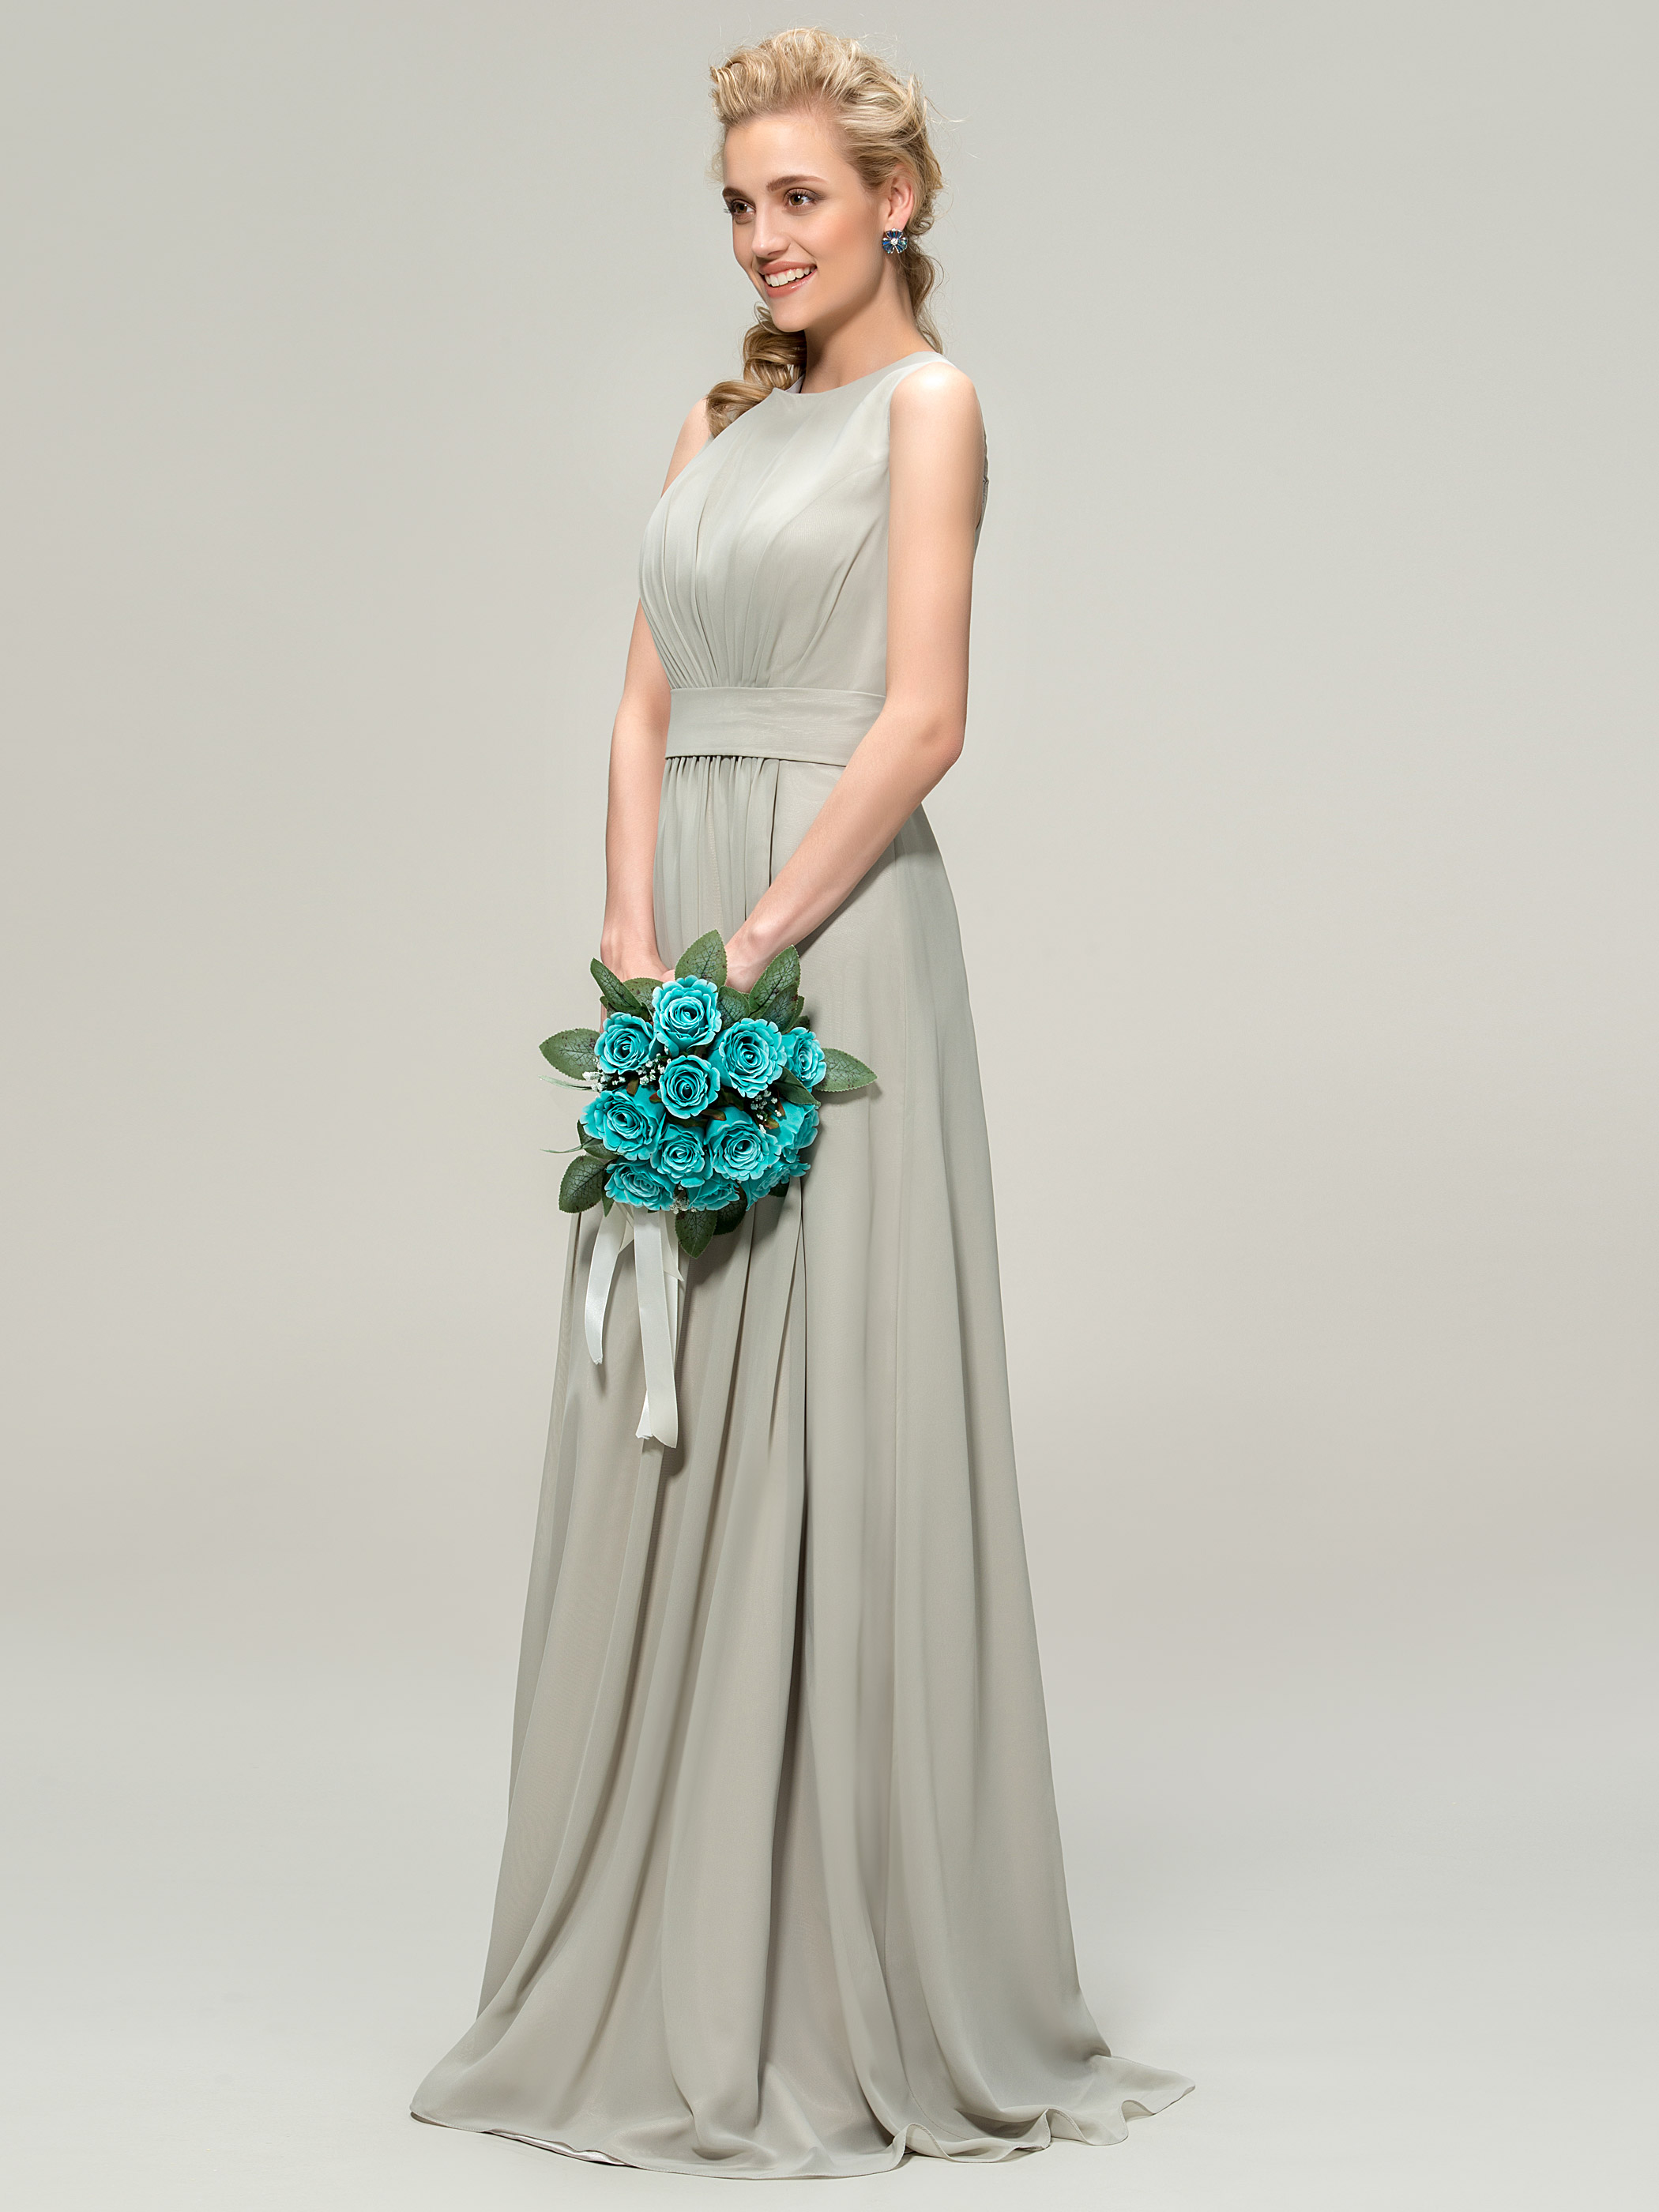 A-Line Jewel Neck Ruched Long Bridemaid Dress